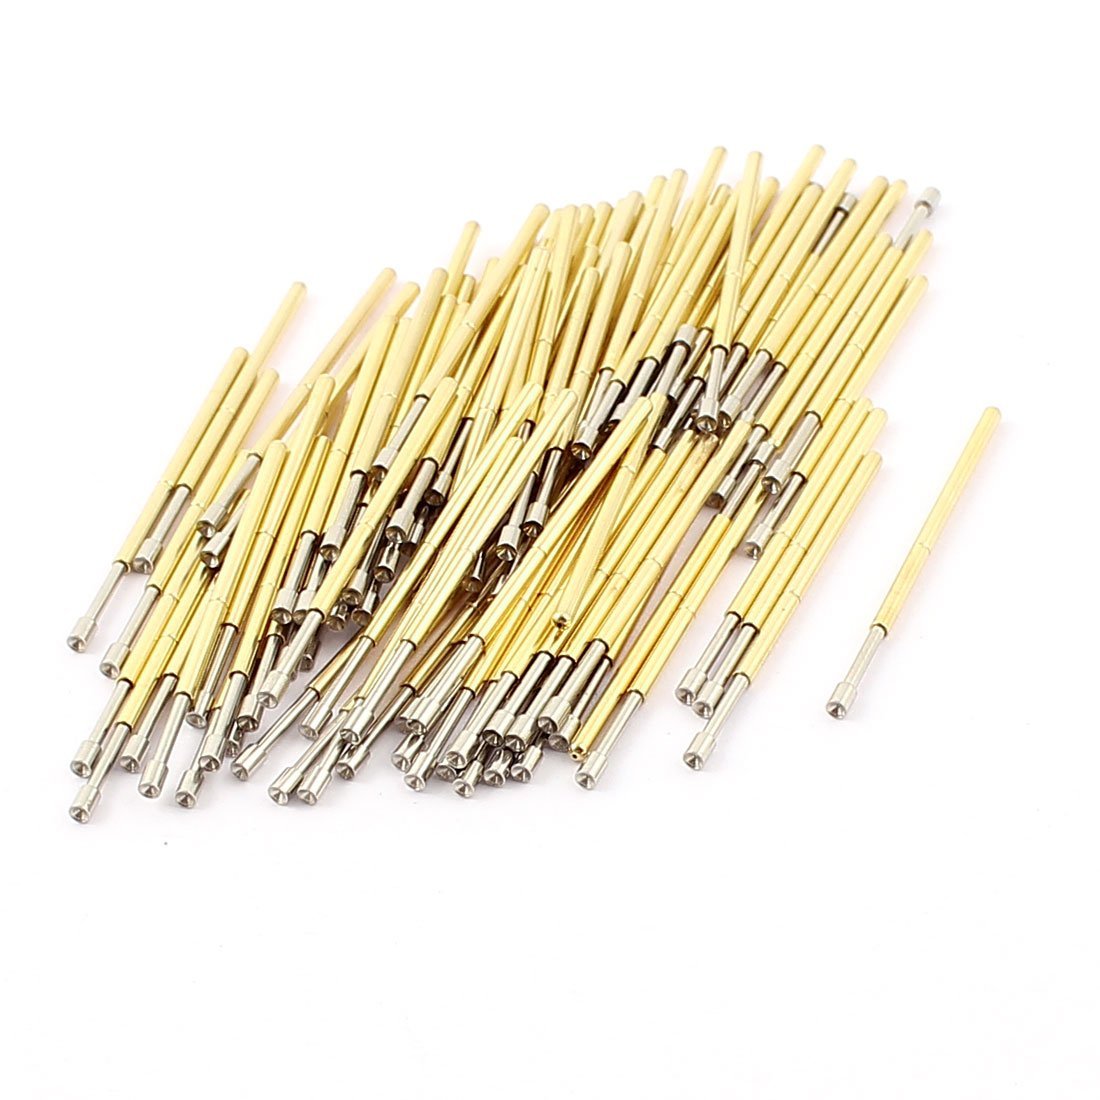 luoyimao 100pcs p100a 15mm dia concave tip spring loaded test probes pin 33mm